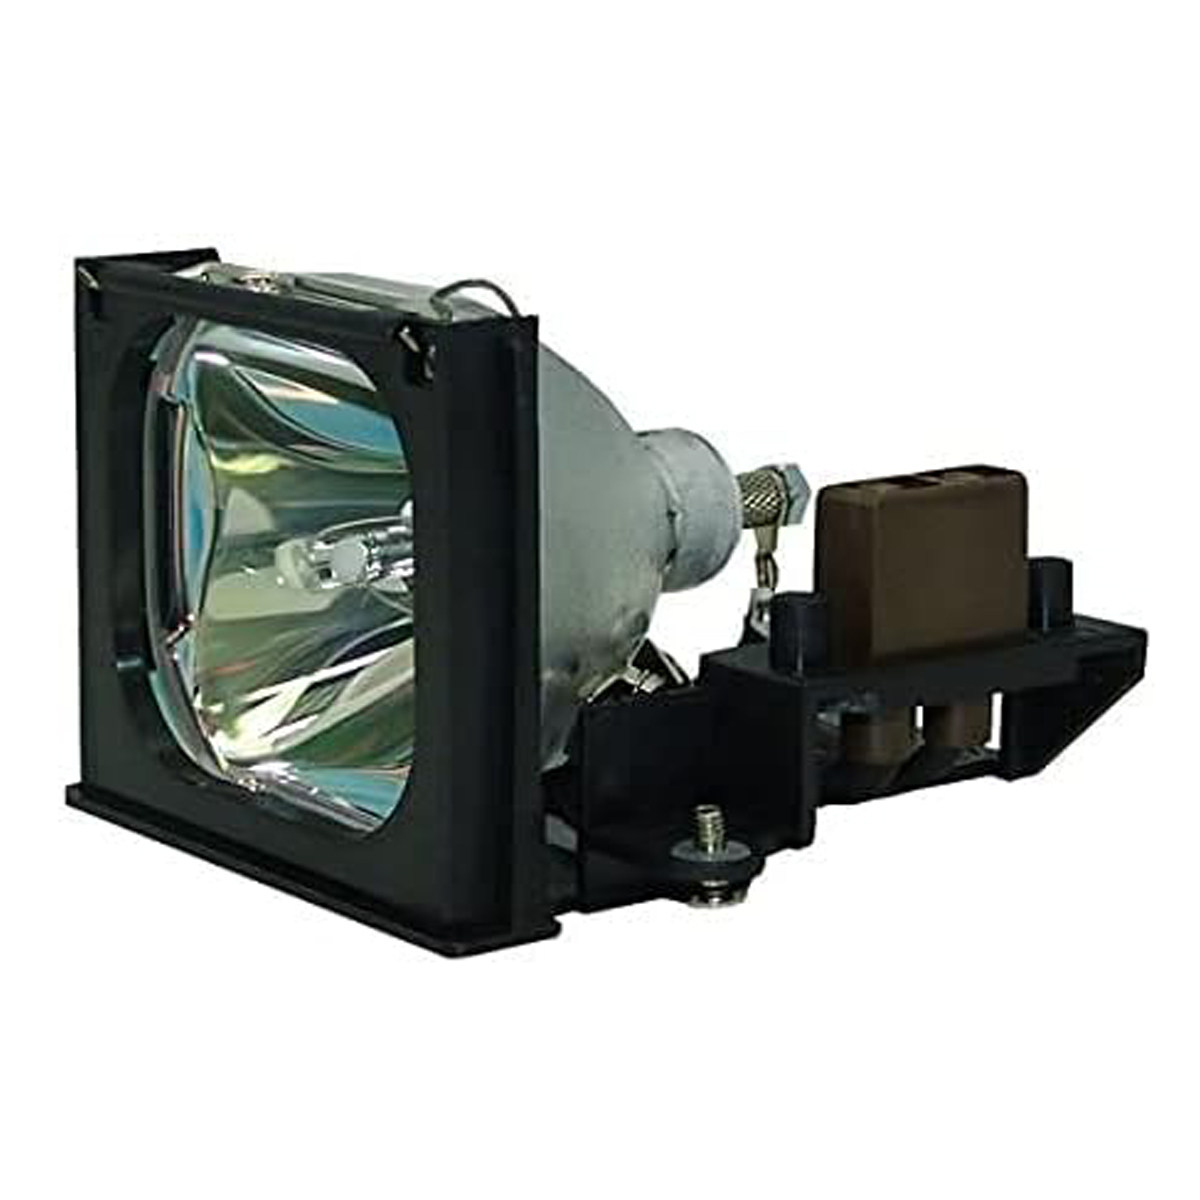 Replacement Projector lamp LCA3108 For PHILIPS LC 4033-40 HOPPER SV20 HOPPER XG20